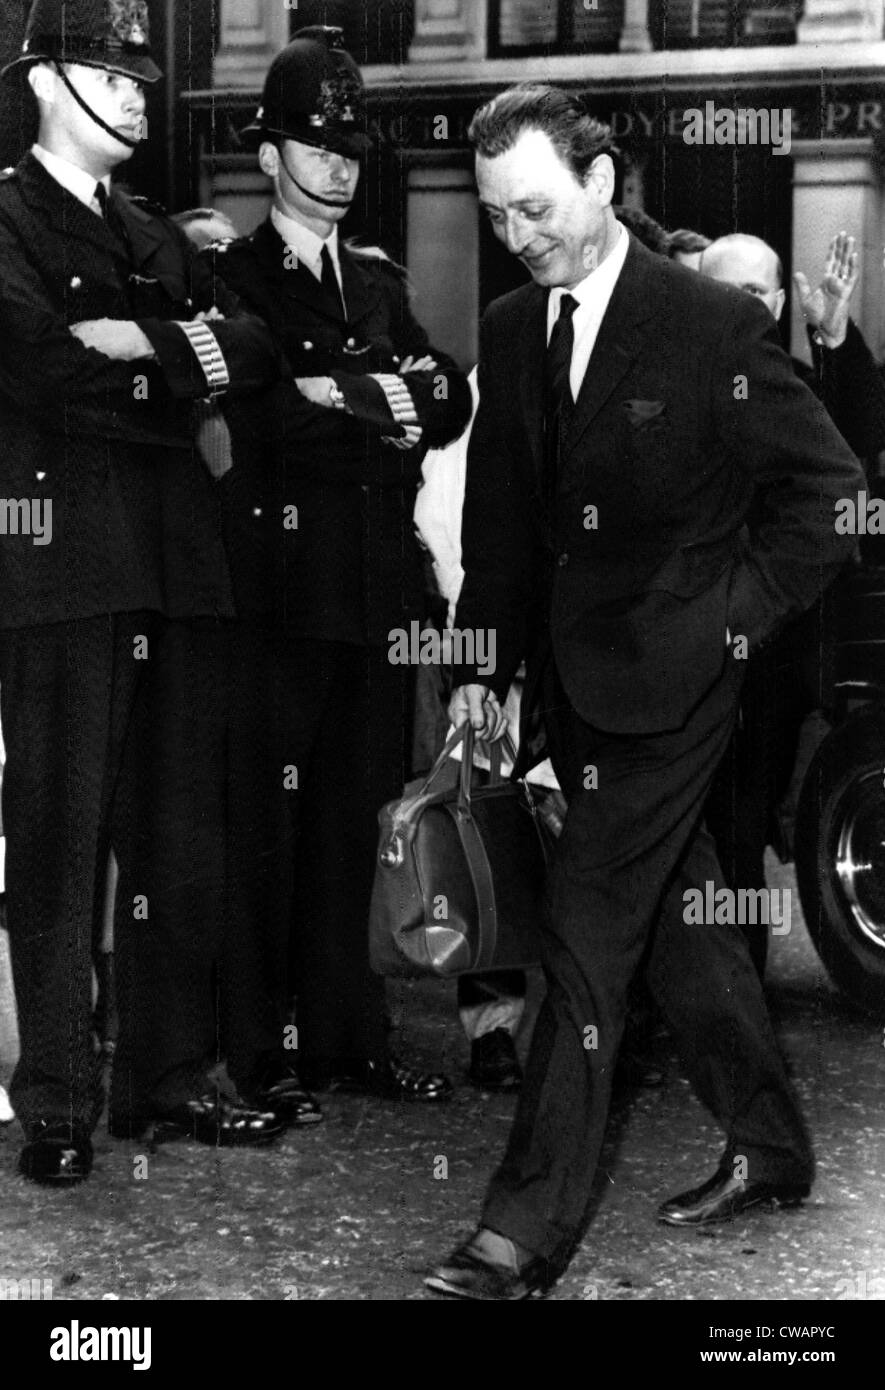 Dr. Stephen Ward on his way to trial at the Old Bailey, London, July 22, 1963. Courtesy: CSU Archives / Everett Collection Stock Photo